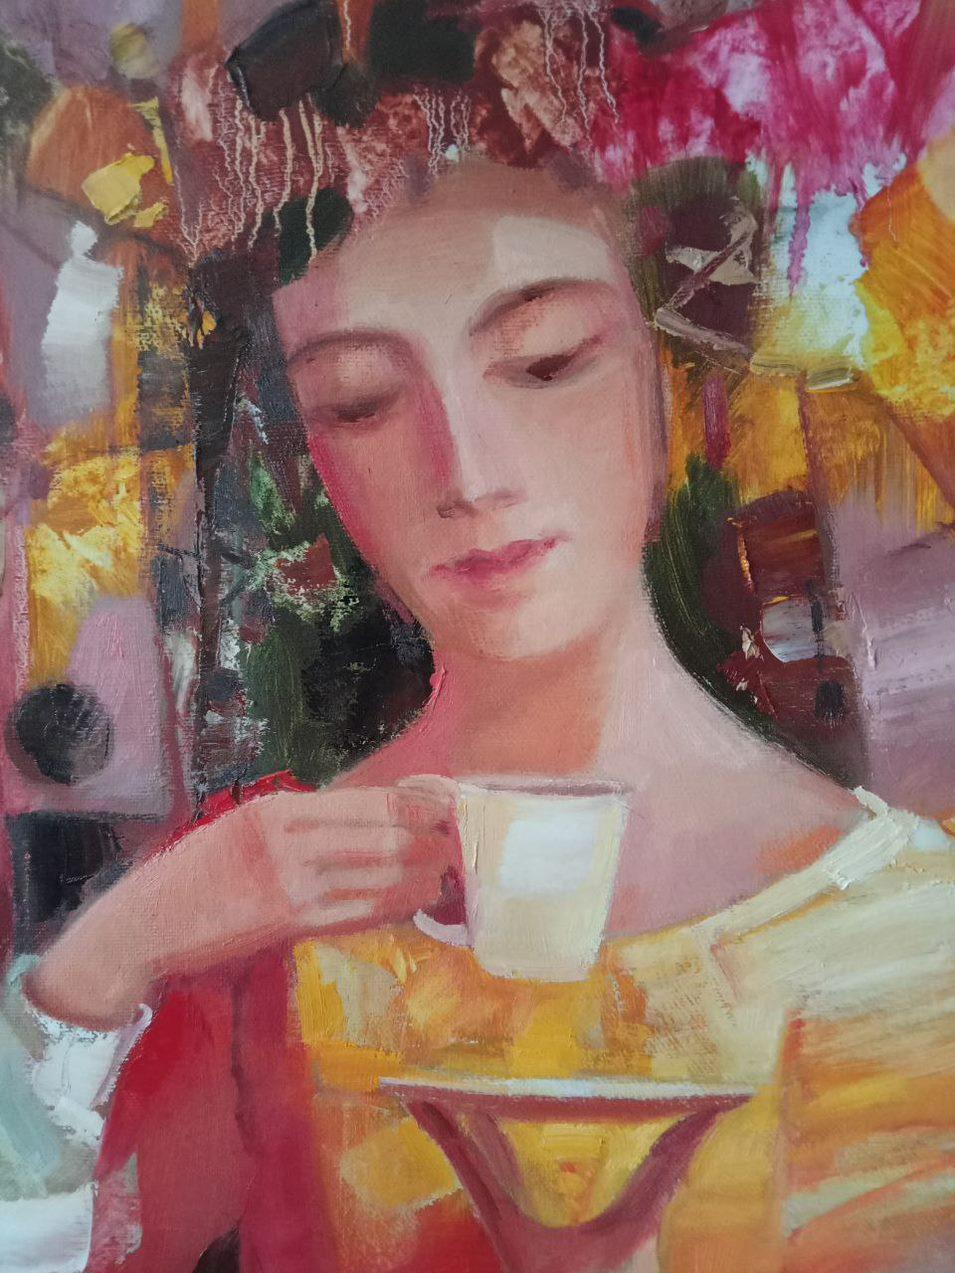 Artist: Anatoly Borisovich Tarabanov
Work: Original oil painting, handmade artwork, one of a kind 
Medium: Oil on Canvas 
Year: 2021
Style: Contemporary Art
Title: A cup of Coffee
Size: 35.5